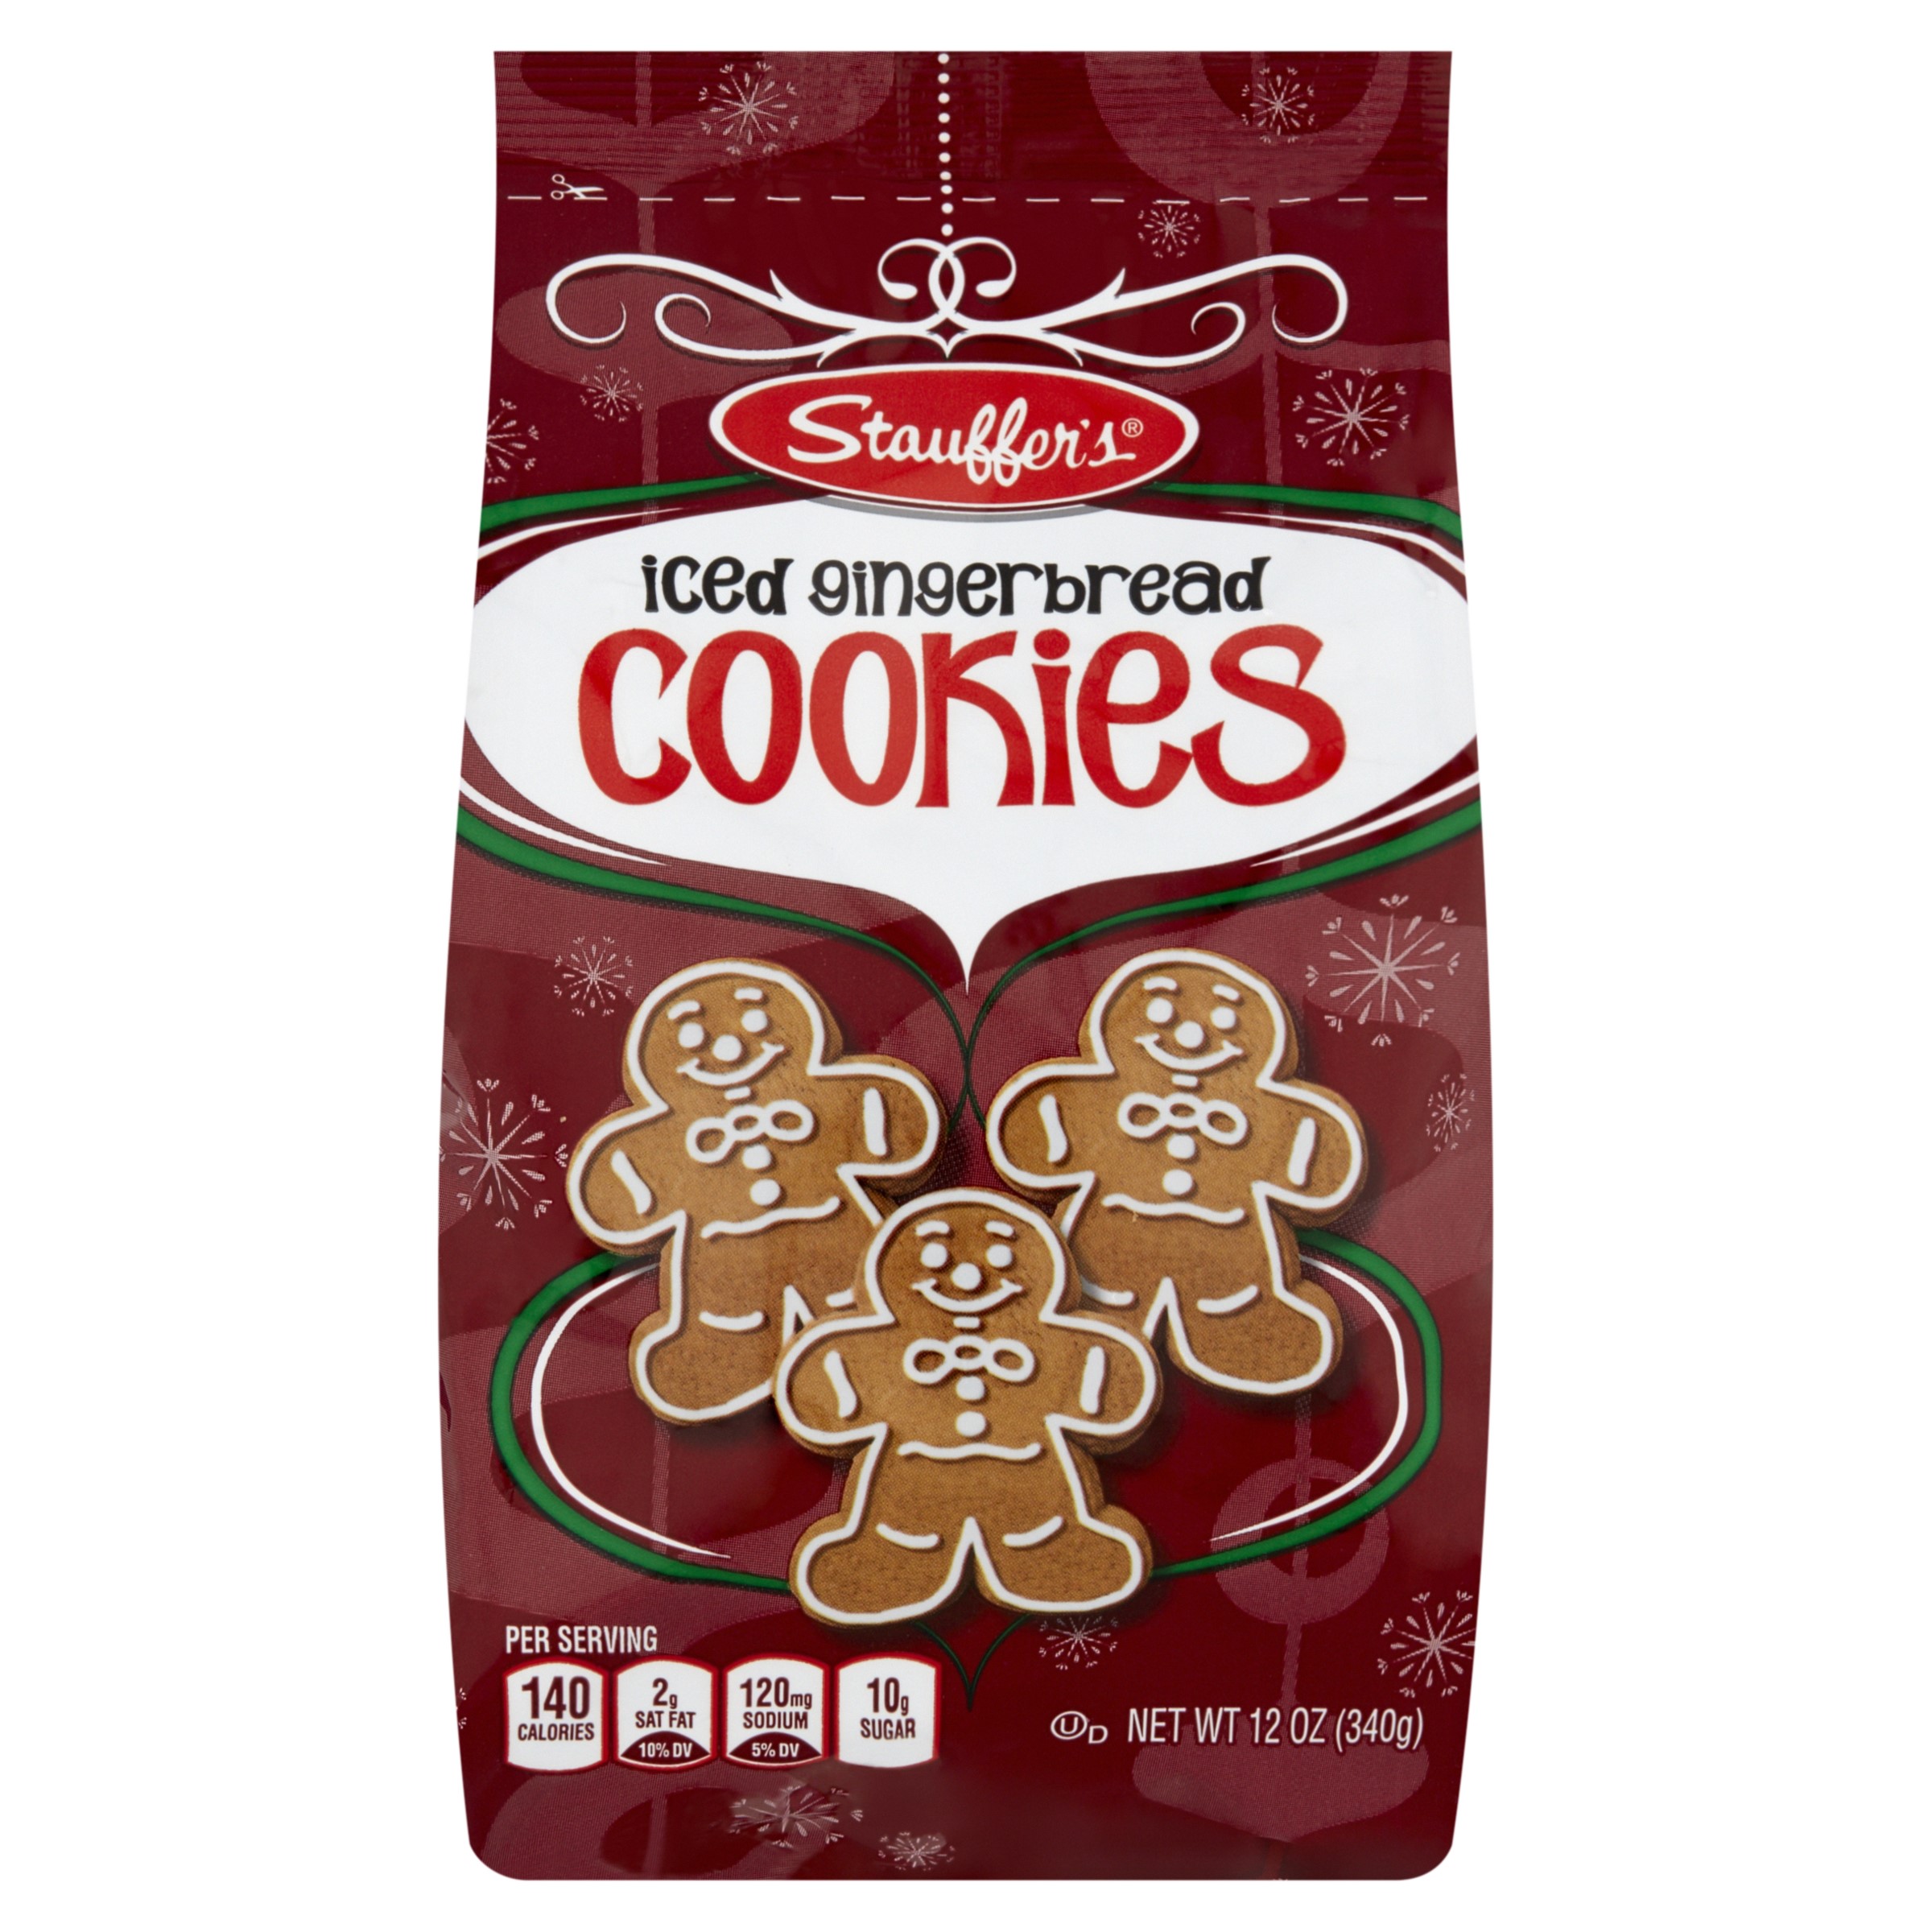 Stauffer's Iced Gingerbread Cookies, 12oz - image 1 of 7